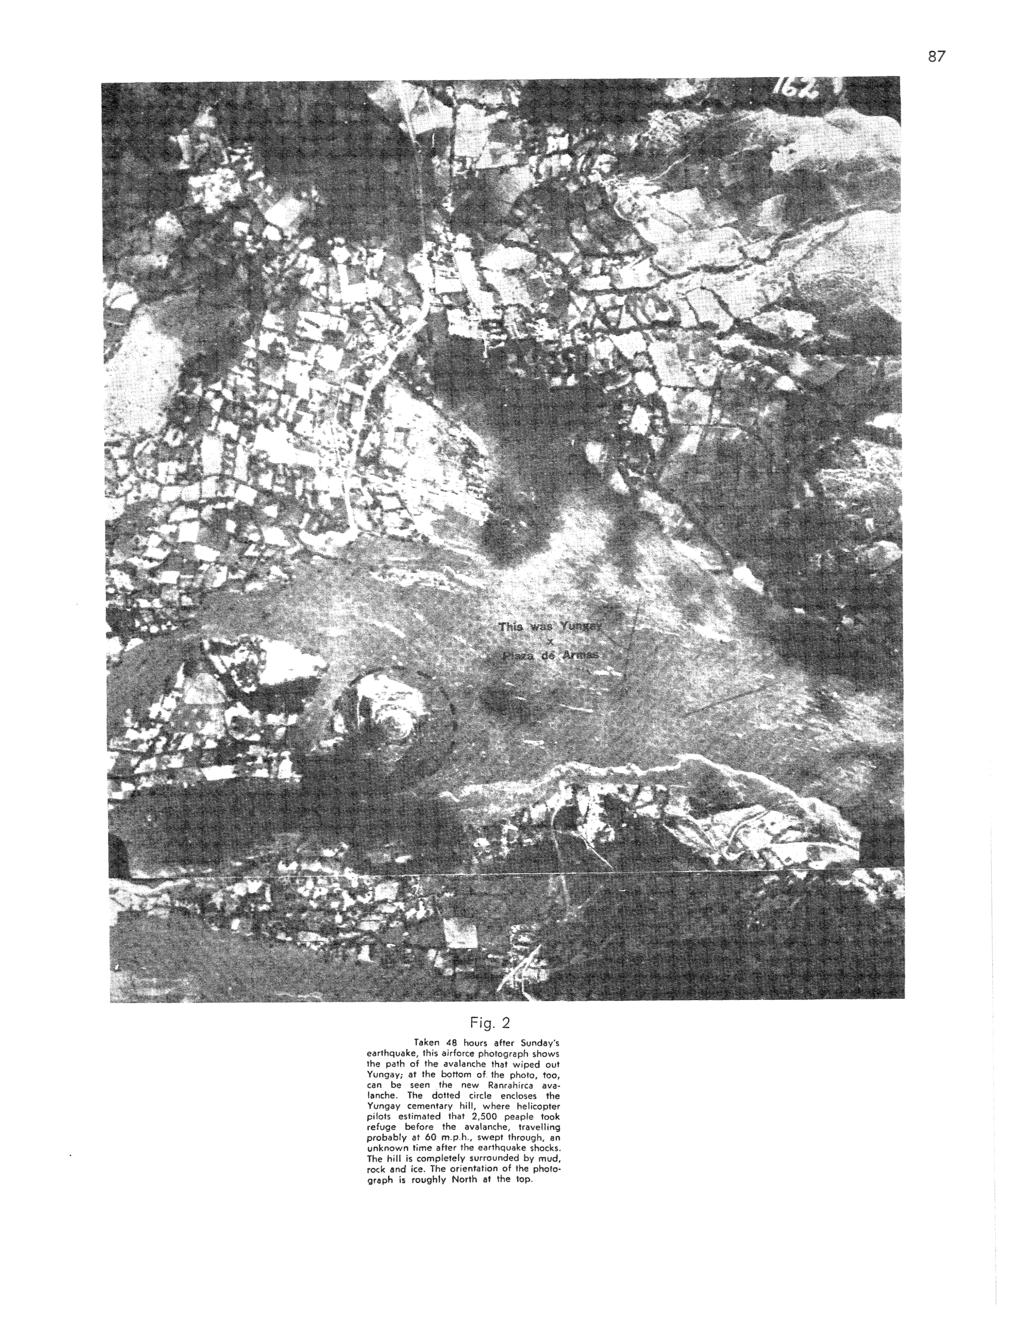 Fig. 2 Taken 48 hours after Sunday's earthquake, this airforce photograph shows the path of the avalanche that wiped out Yungay; at the bottom of the photo, too, can be seen the new Ranrahirca